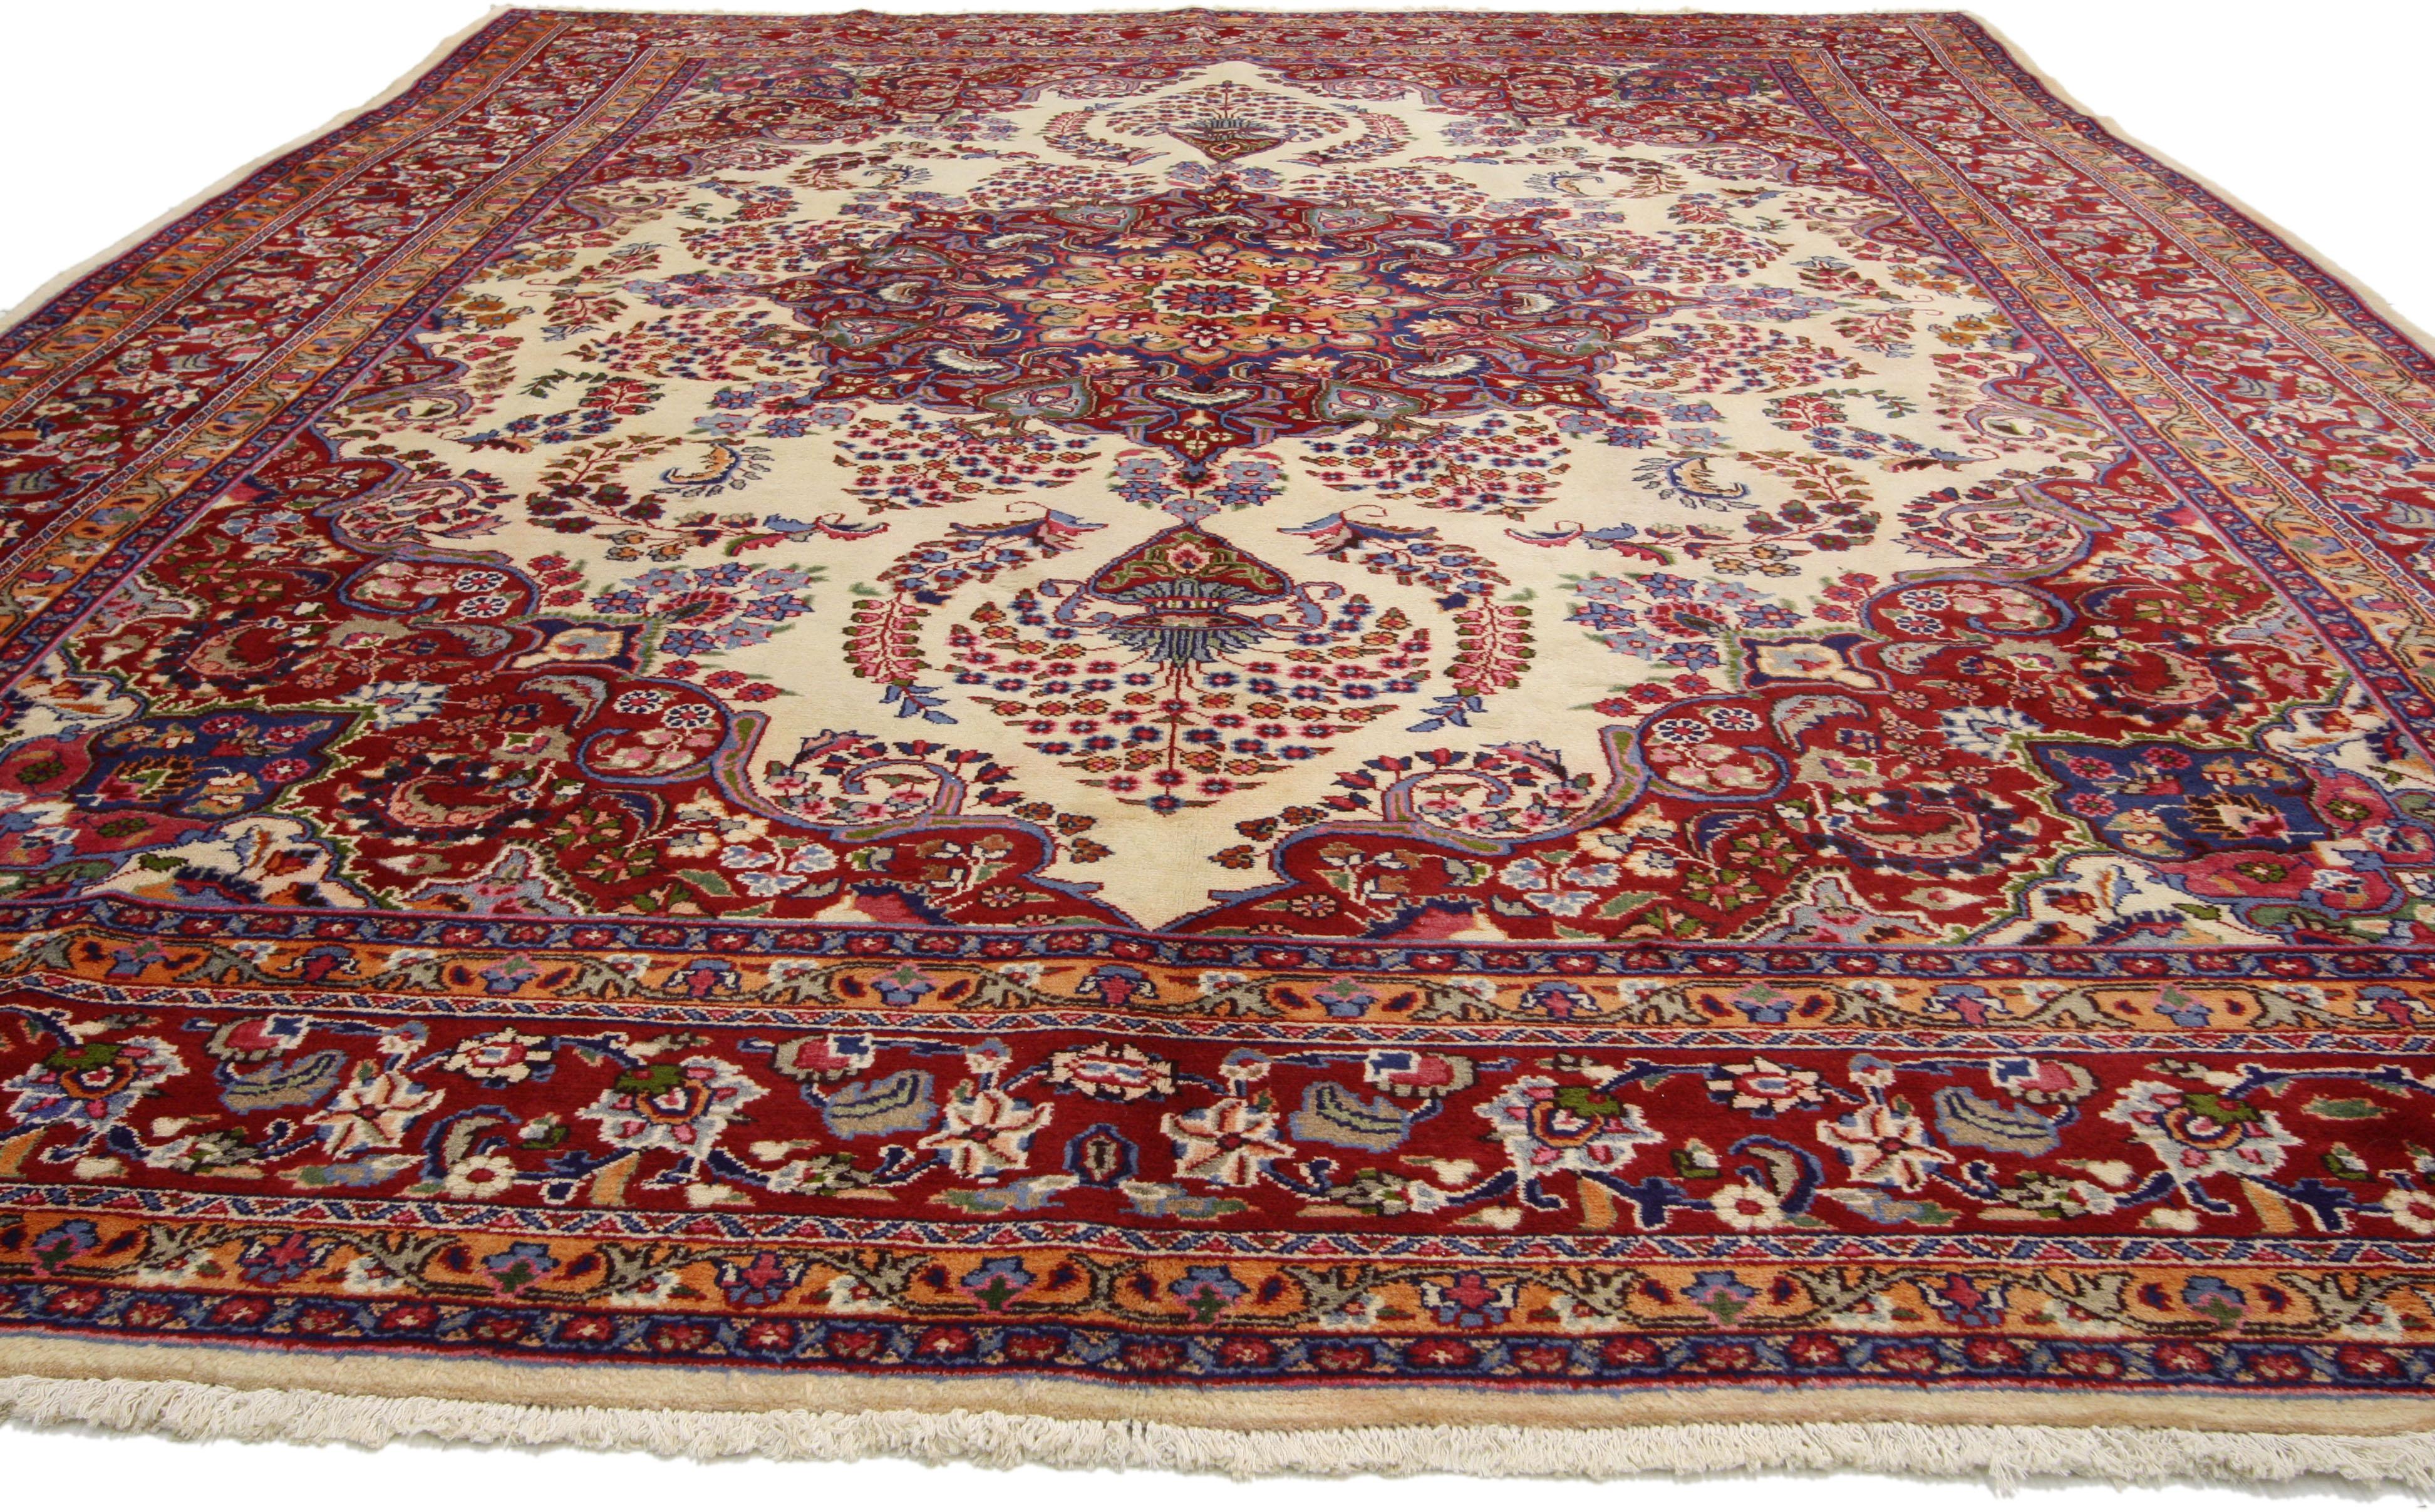 75921, vintage Persian Khorassan Area rug with traditional style. This hand-knotted wool vintage Persian Khorassan rug features a 16-point centre medallion flanked with vase finials on each side in an ivory field surrounded by all-over hyacinth